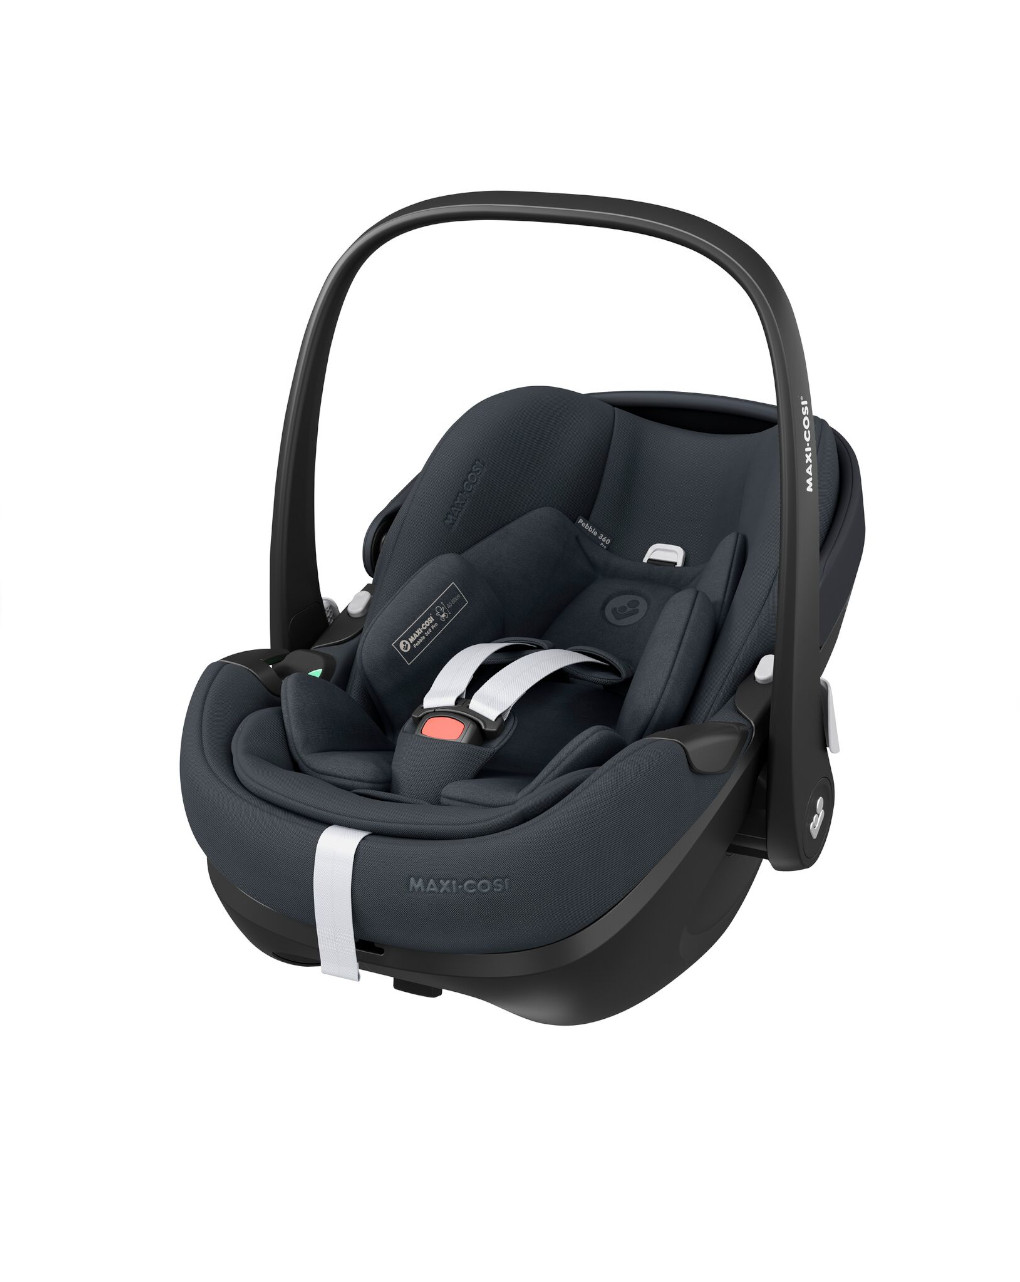 Mica Pro Eco i-Size (birth to 4yrs)